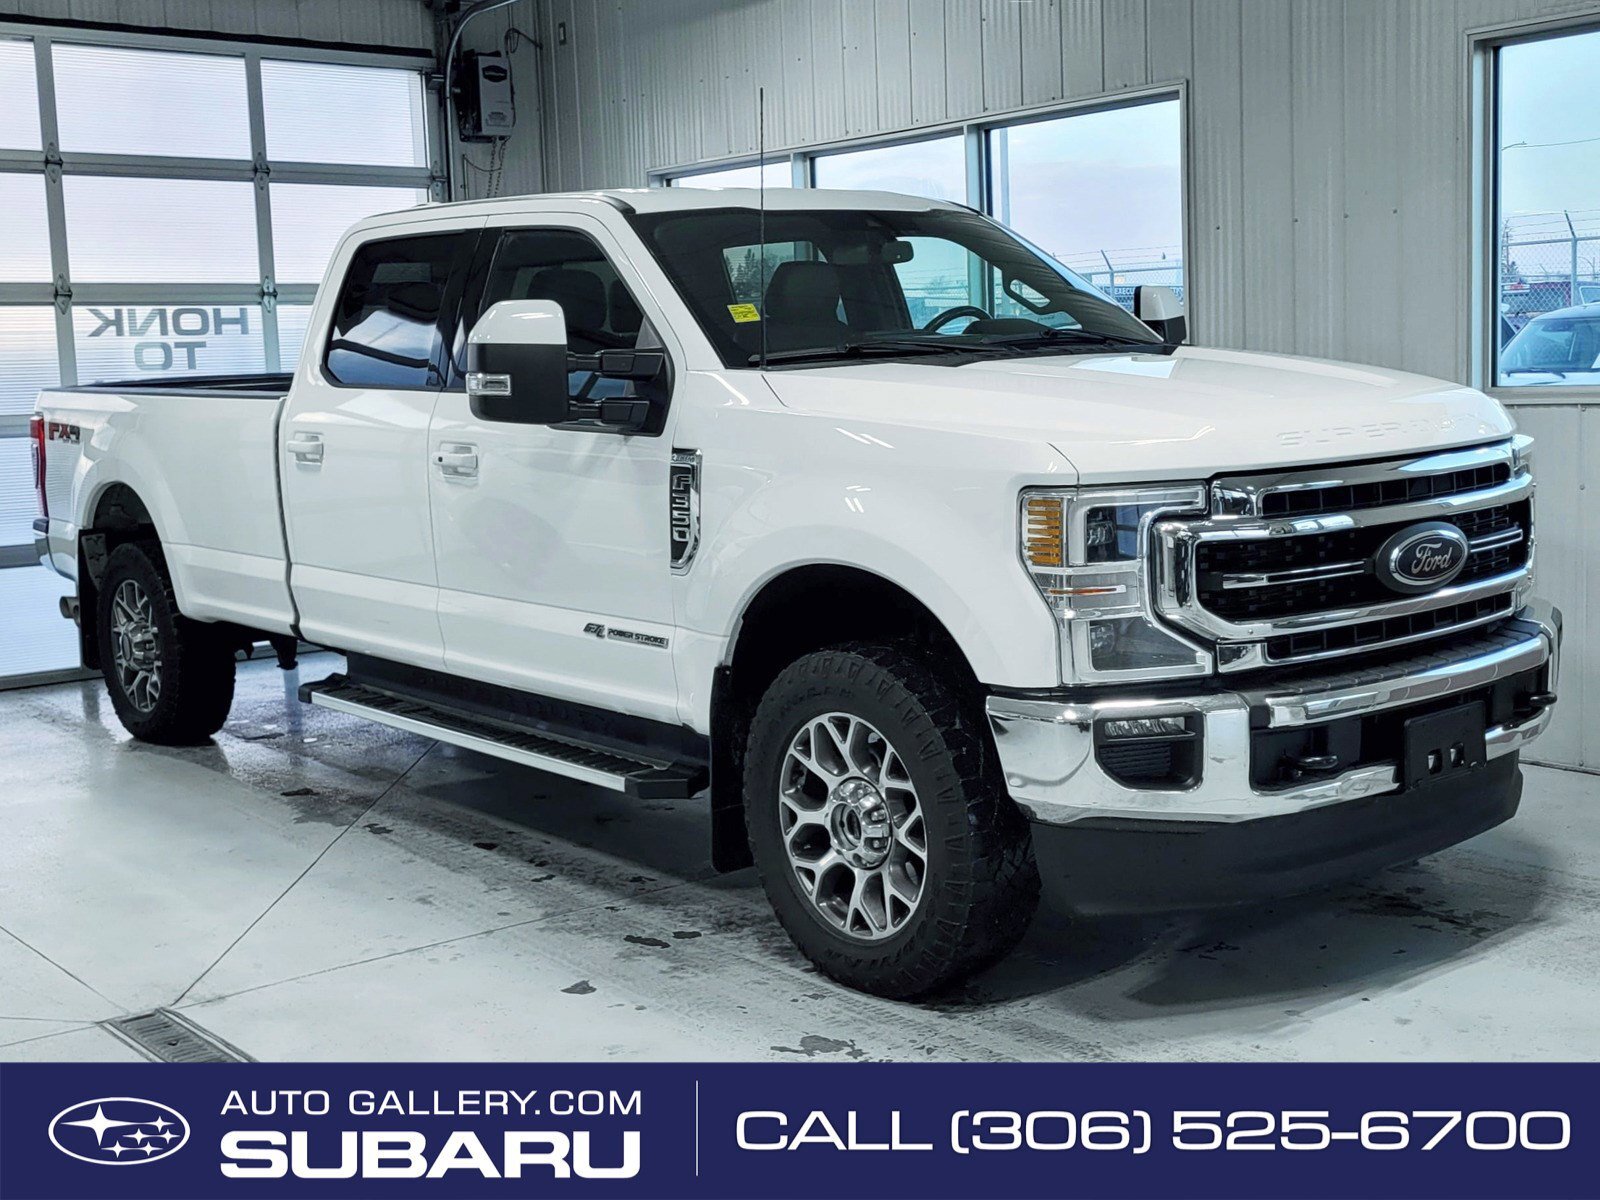 2022 Ford F-350 LARIAT 4X4 | TURBODIESEL | VOICE RECOGNITION